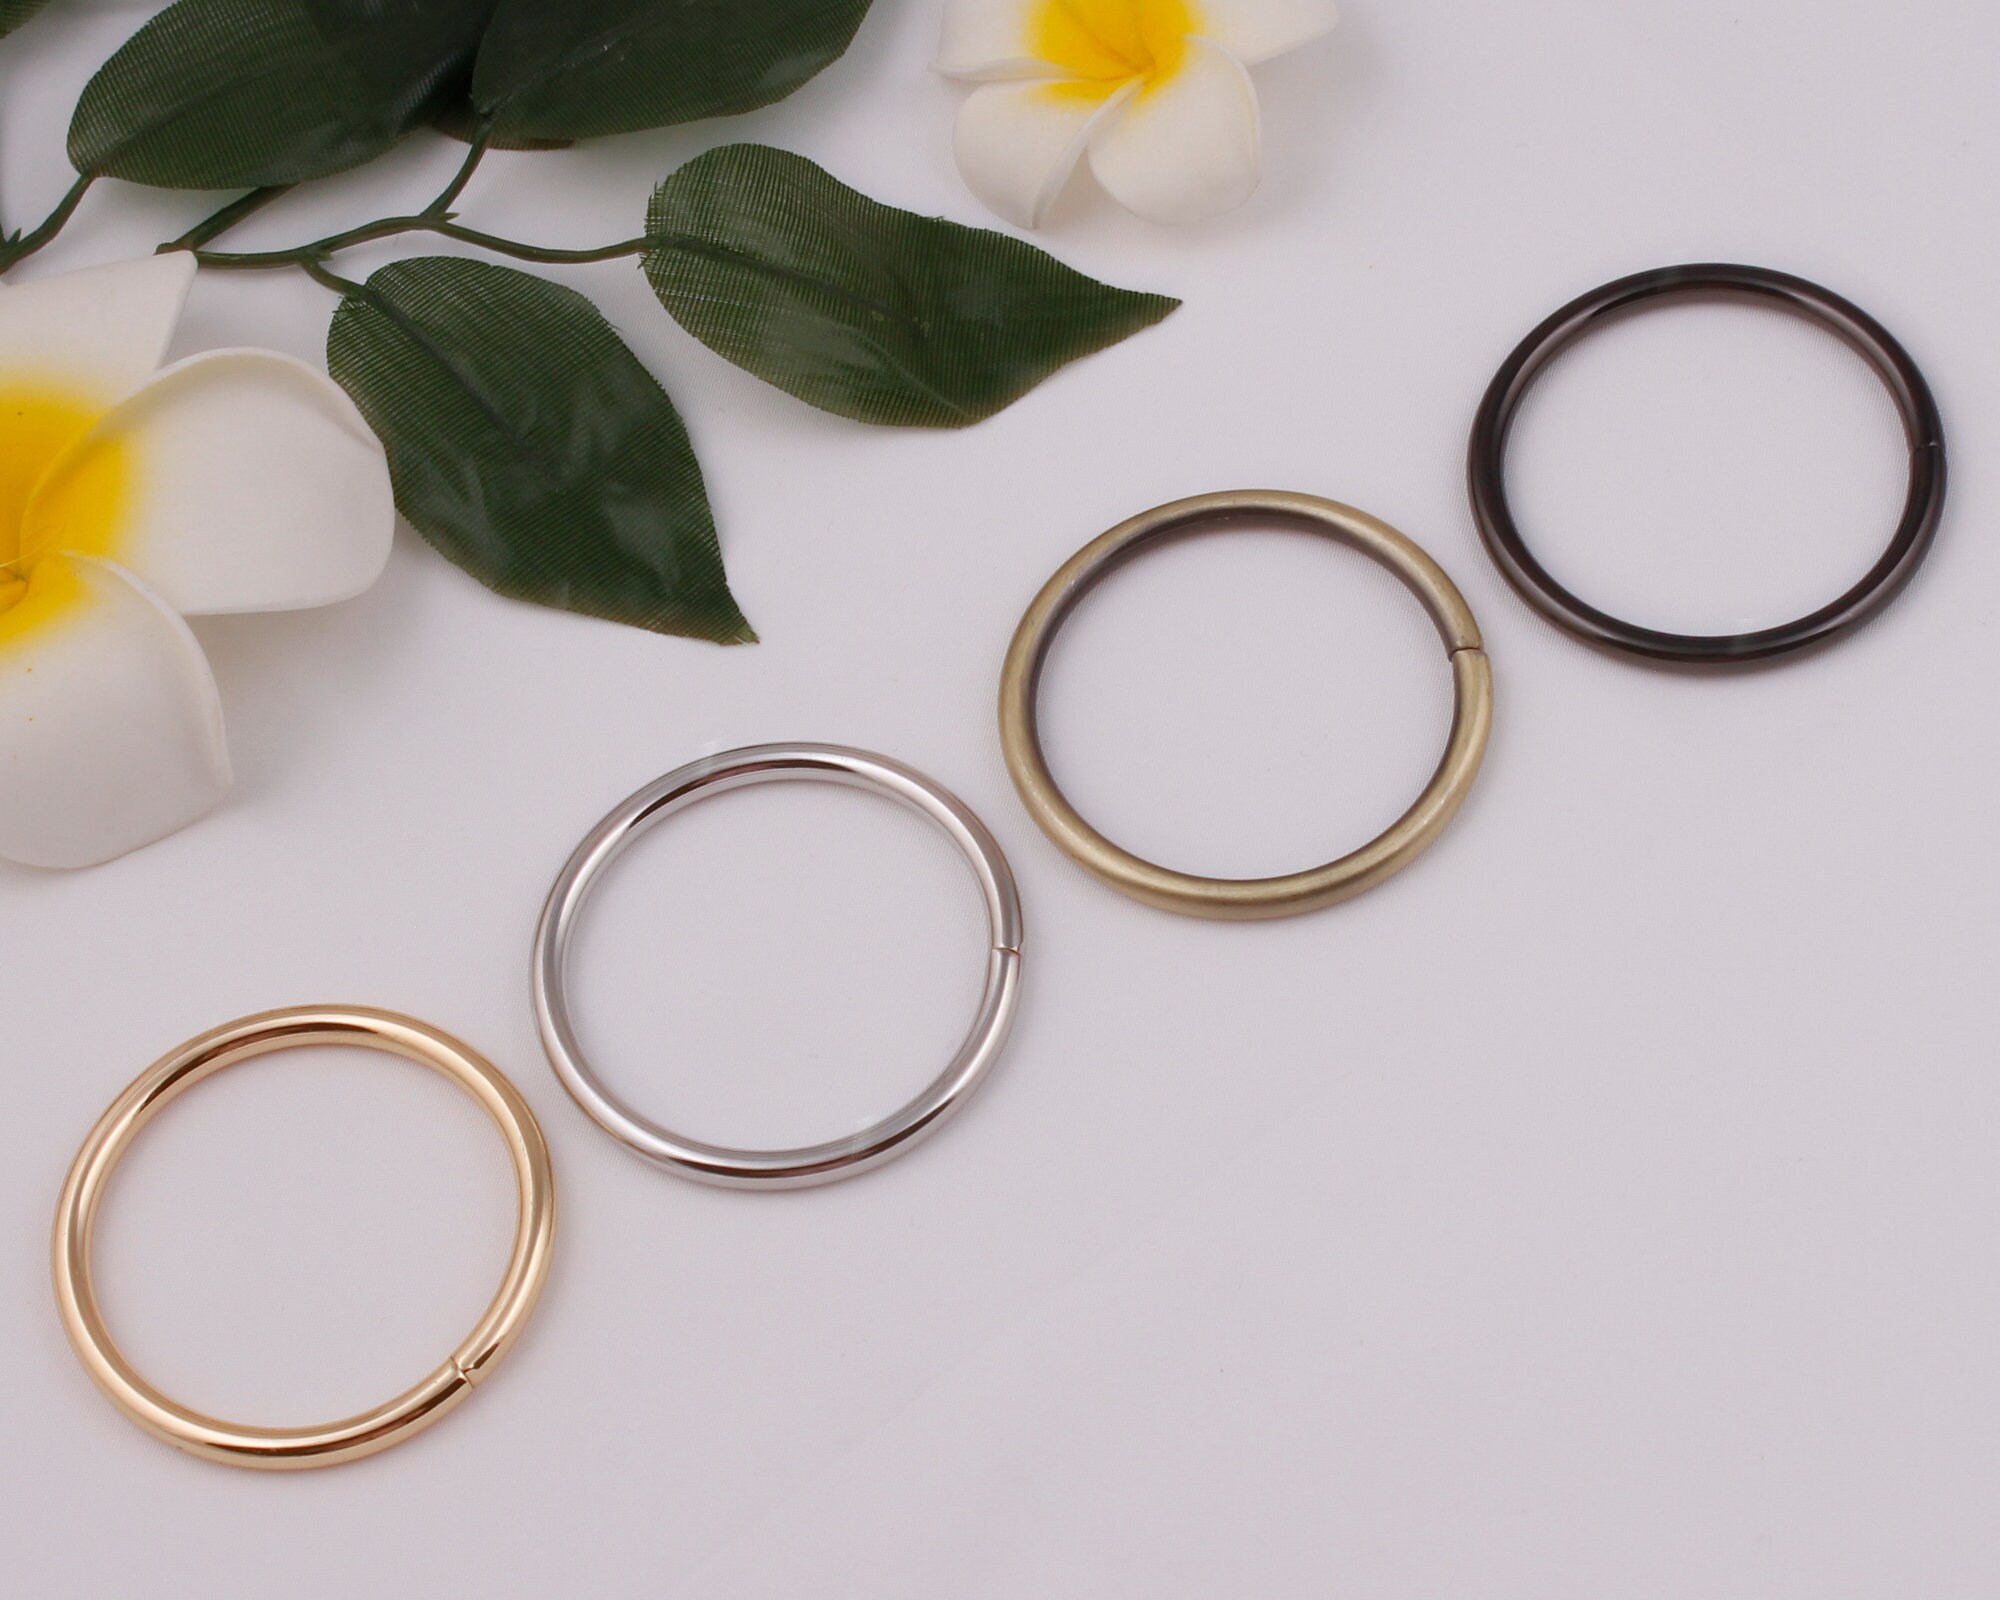 D Ring Rose Gold/bronze/silver/gold I Inch Non Welded D Buckle Metal Dee  Loop D Rings FOR Purse Strap Bag Belt Webbing Leather Crafts-10pcs 